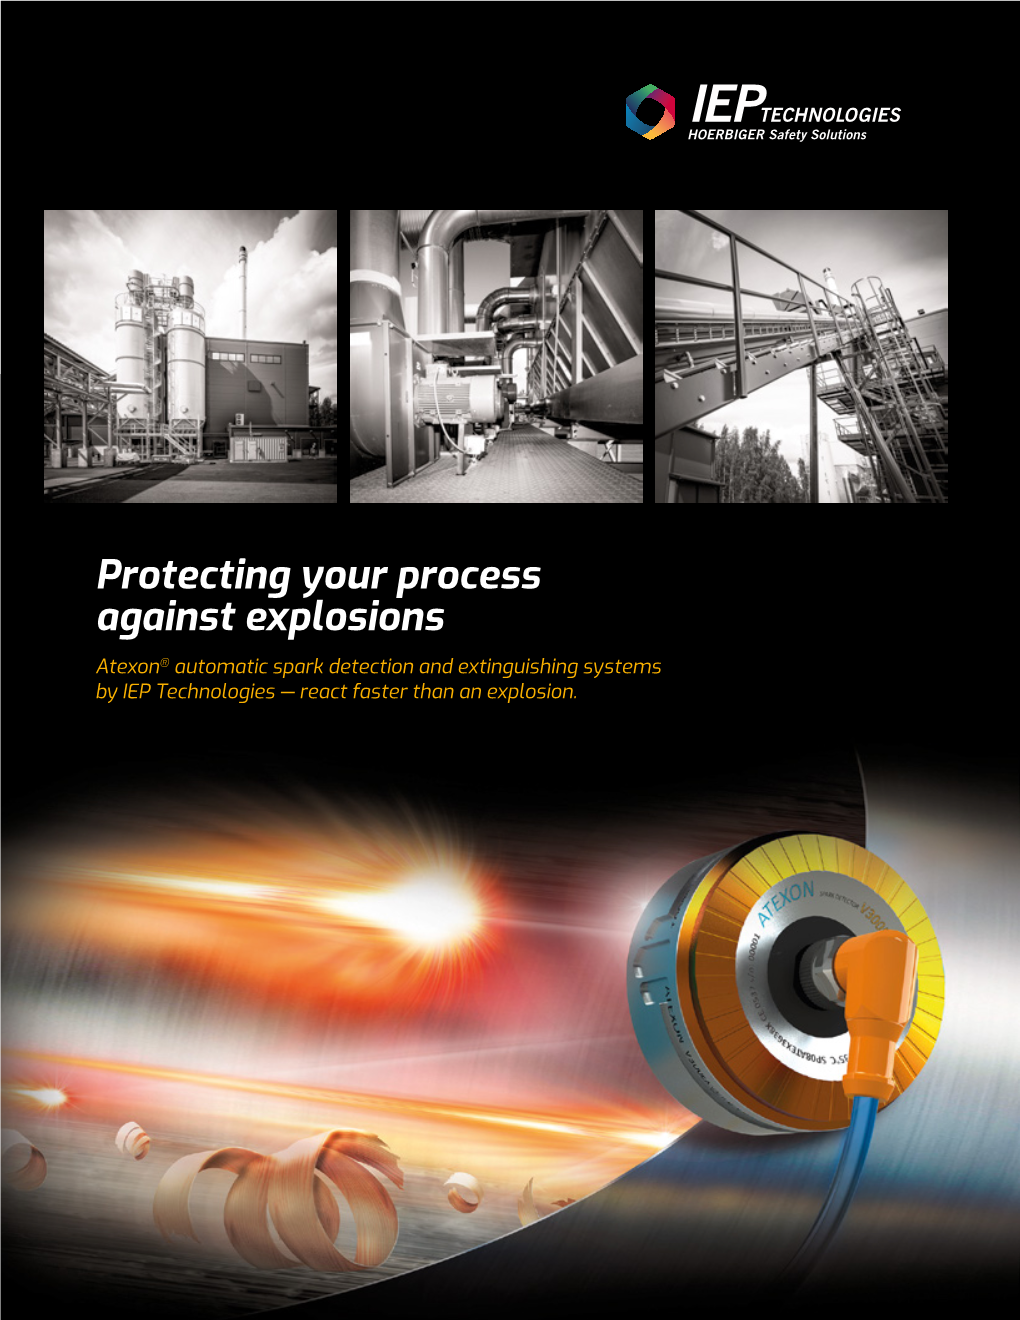 Protecting Your Process Against Explosions Atexon® Automatic Spark Detection and Extinguishing Systems by IEP Technologies — React Faster Than an Explosion